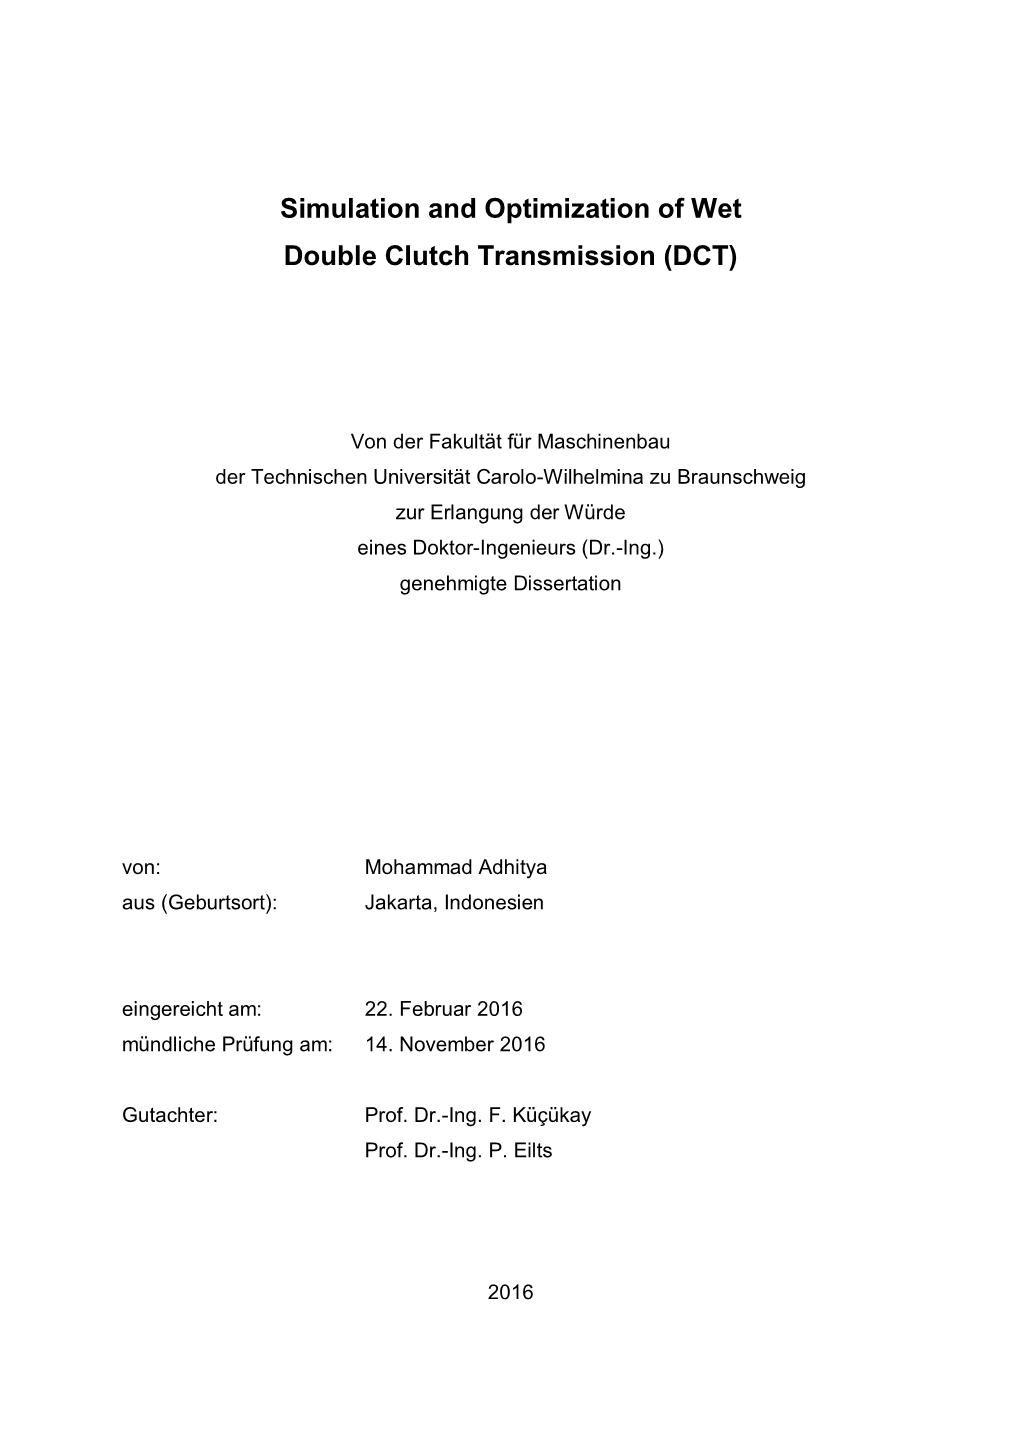 Simulation and Optimization of Wet Double Clutch Transmission (DCT)